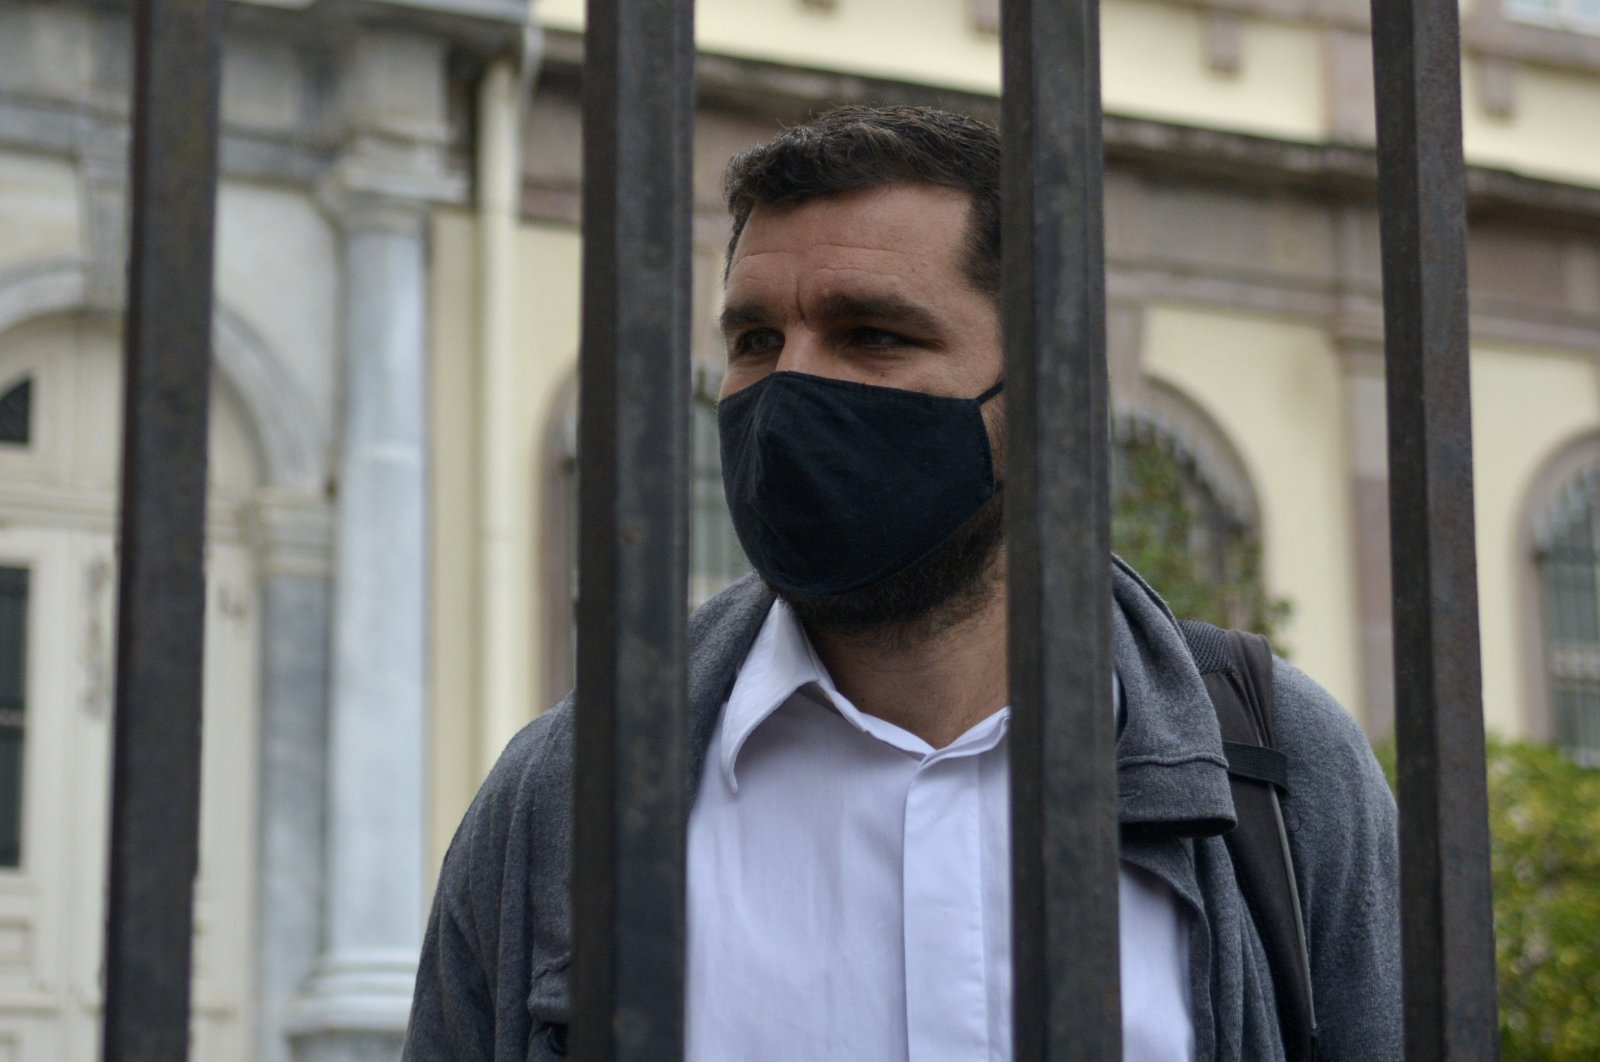 Greek Nasos Karakitsos stands at the yard of a court before his trial in Mytilene port, on the northeastern Aegean island of Lesbos, Greece, Nov. 18, 2021. (AP Photo)